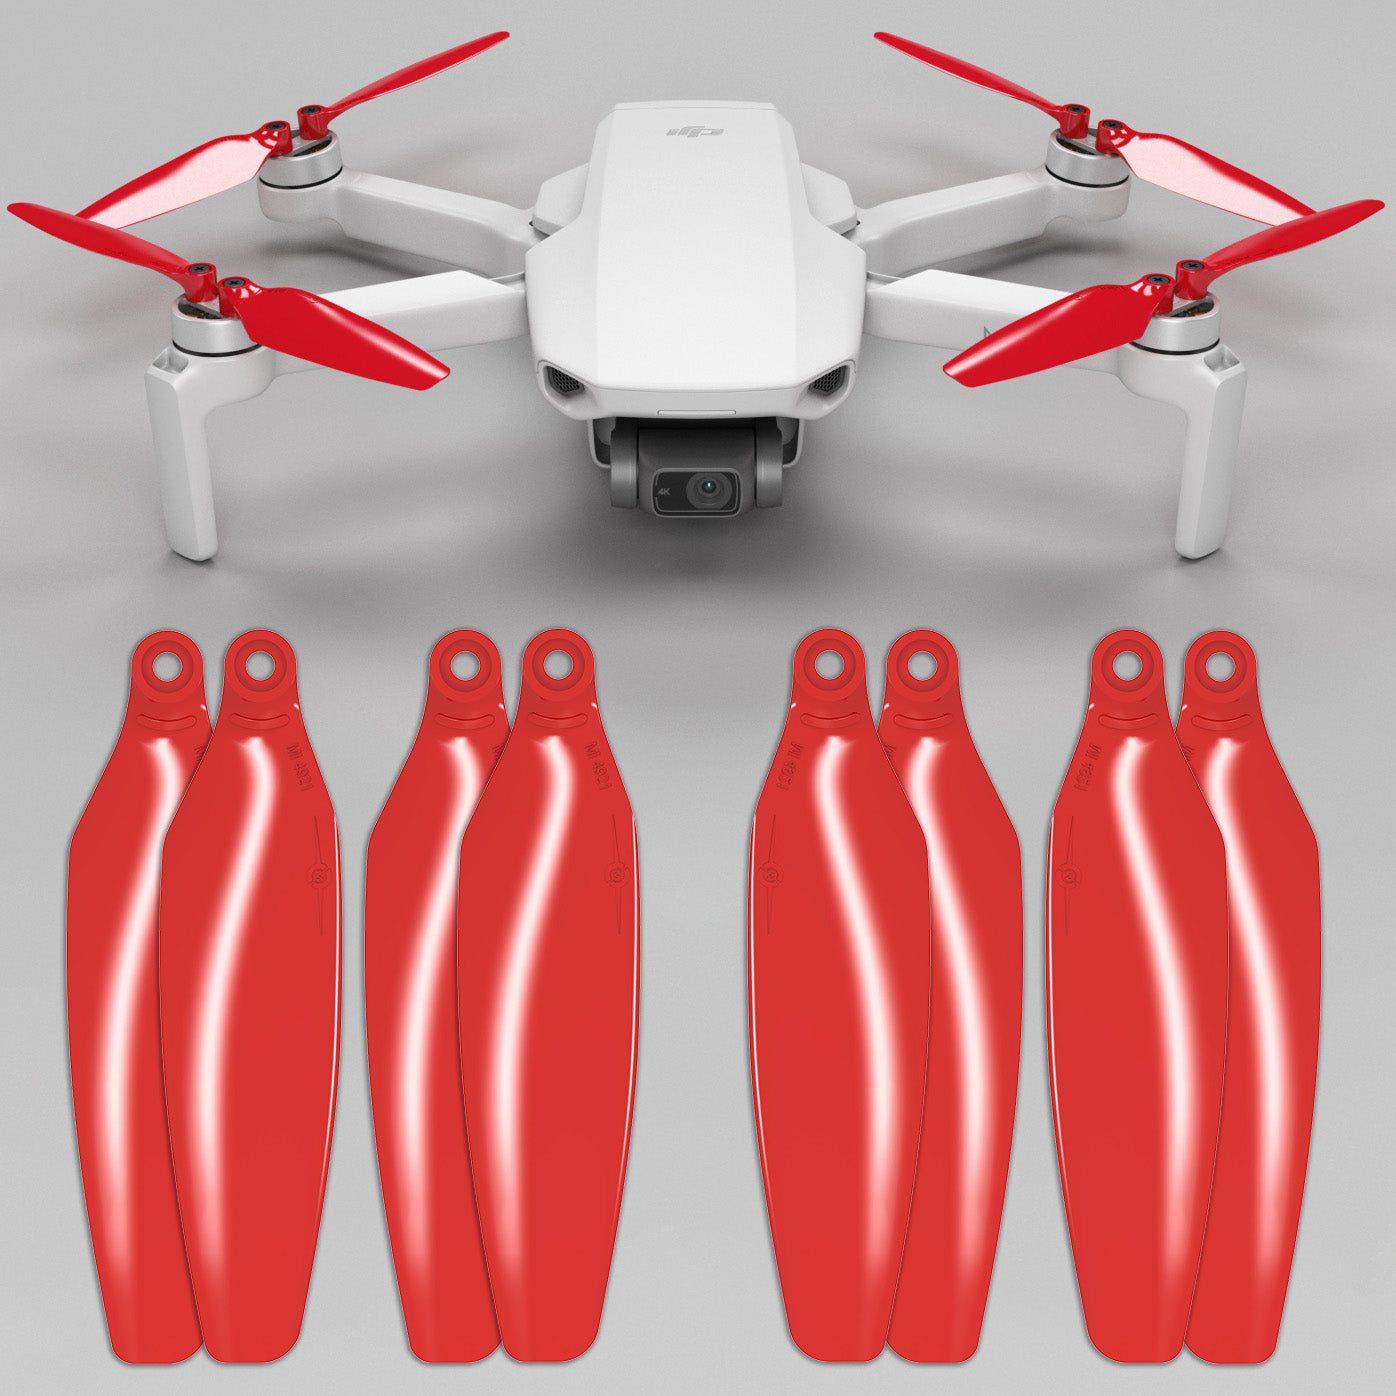 Master Airscrew Stealth Propellers for DJI Mini 2 & Mini SE - Red, 4 Propellers in Set